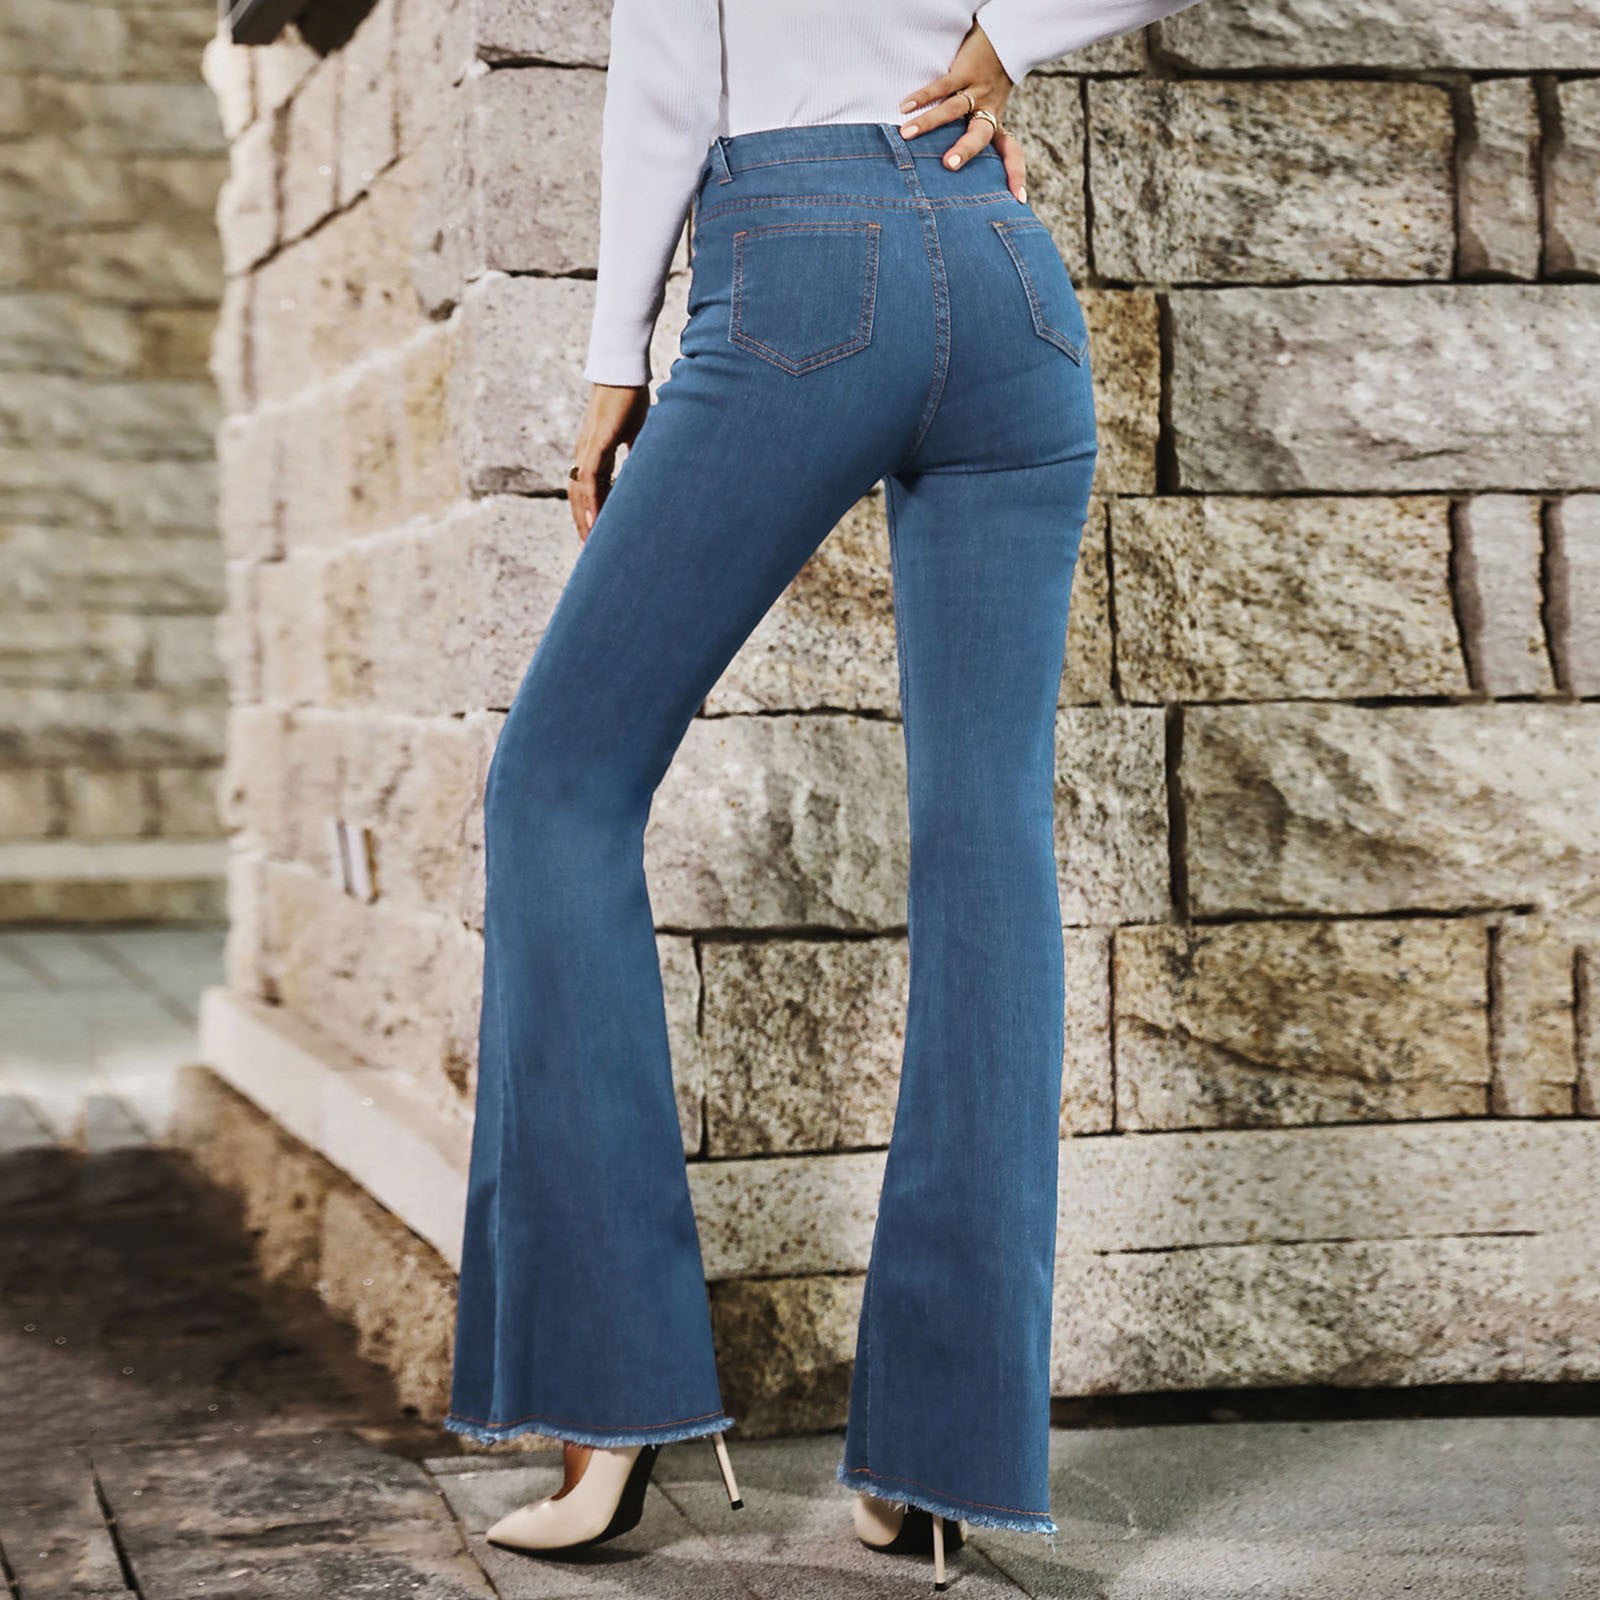 B91xZ Work Pants For Women High Waist Spring And Autumn New Wide Leg  Elastic Slim Stitching Denim Flared Jeans Jeans For Women BU3,Size XS 